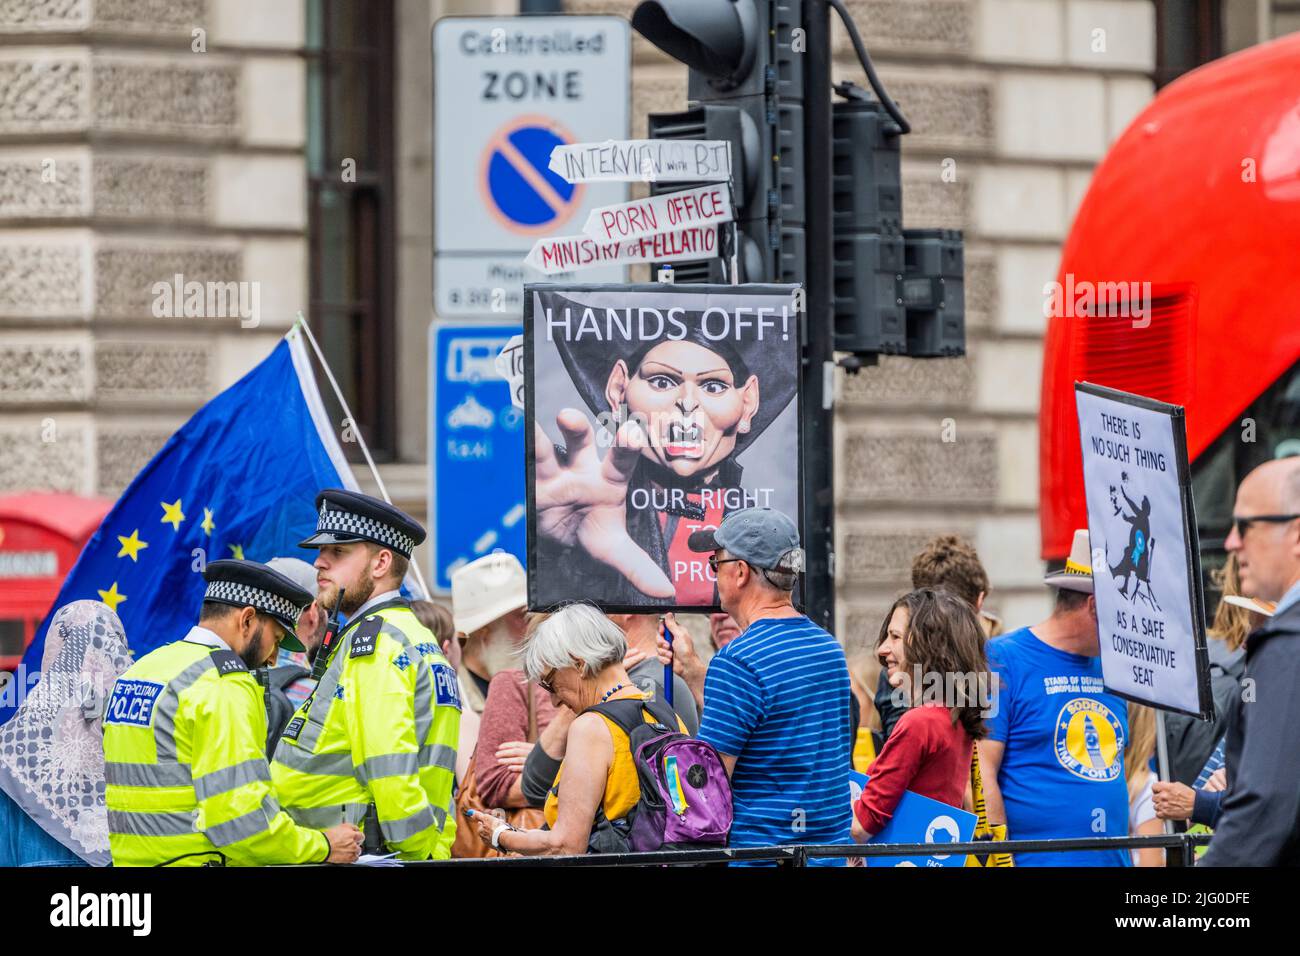 London, UK. 6th July, 2022. Hands off our right to protest placard with Priti Patel as Dracula on the edge of a 'controlled zone' - Protest (led by Steve Bray and SODEM) against Prime Minister Boris Johnson, while he is in Parliament for Prime Minister's Questions. They believe he and his government are 'corrupt and liars'. Credit: Guy Bell/Alamy Live News Stock Photo